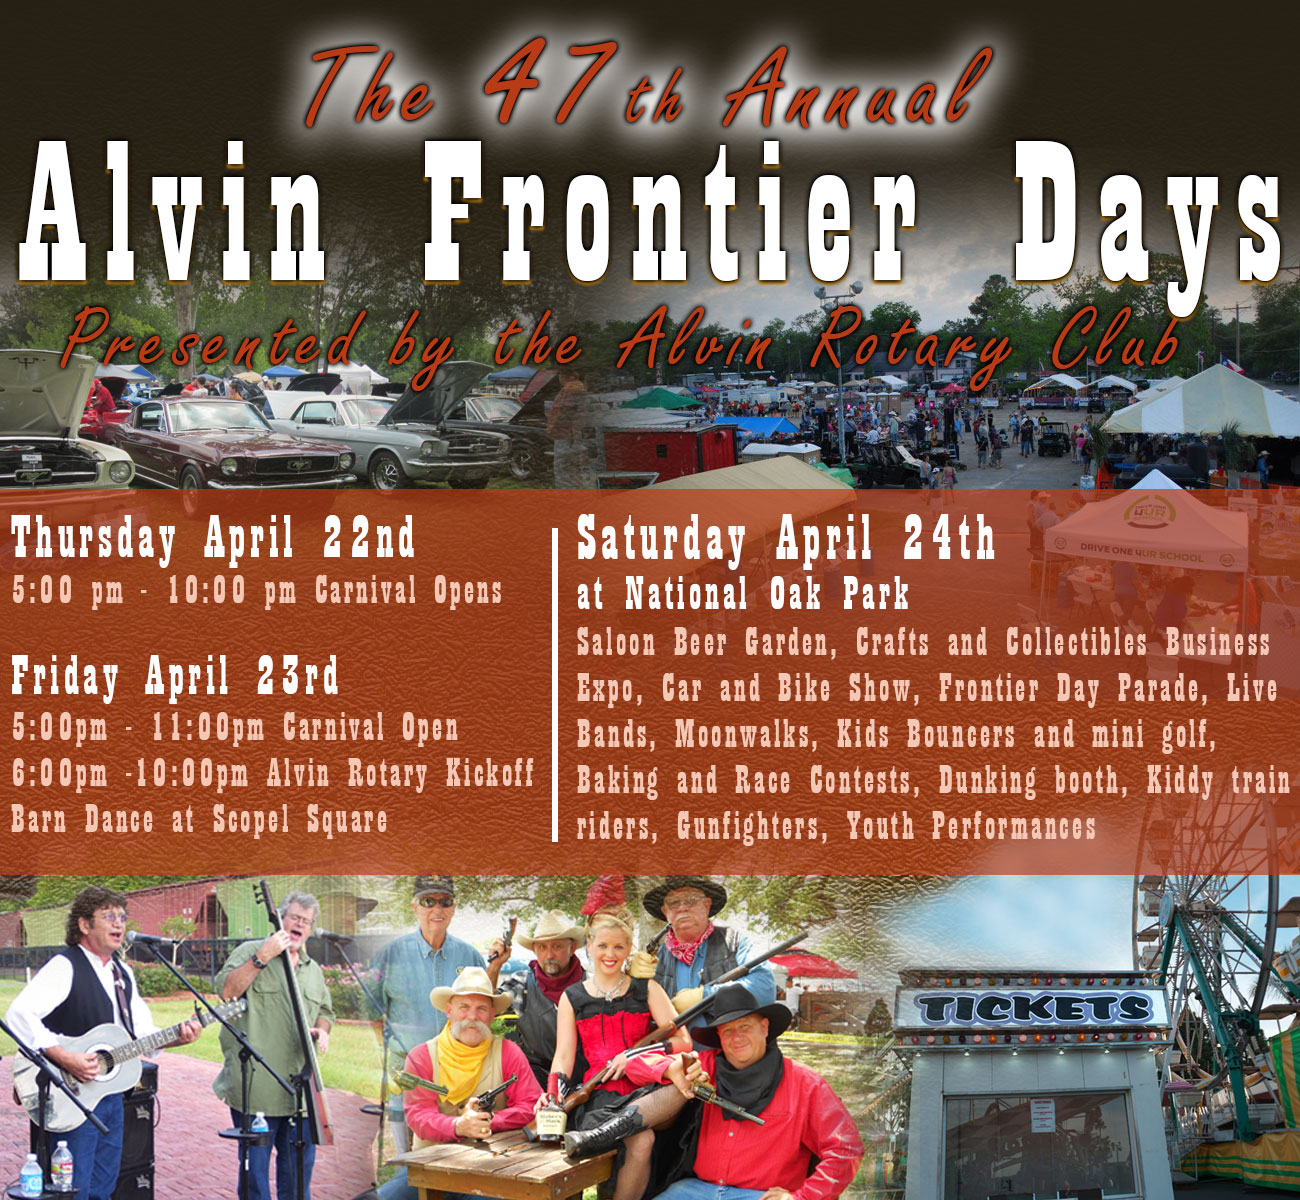 Alvin Frontier Day Home of the Alvin Convention